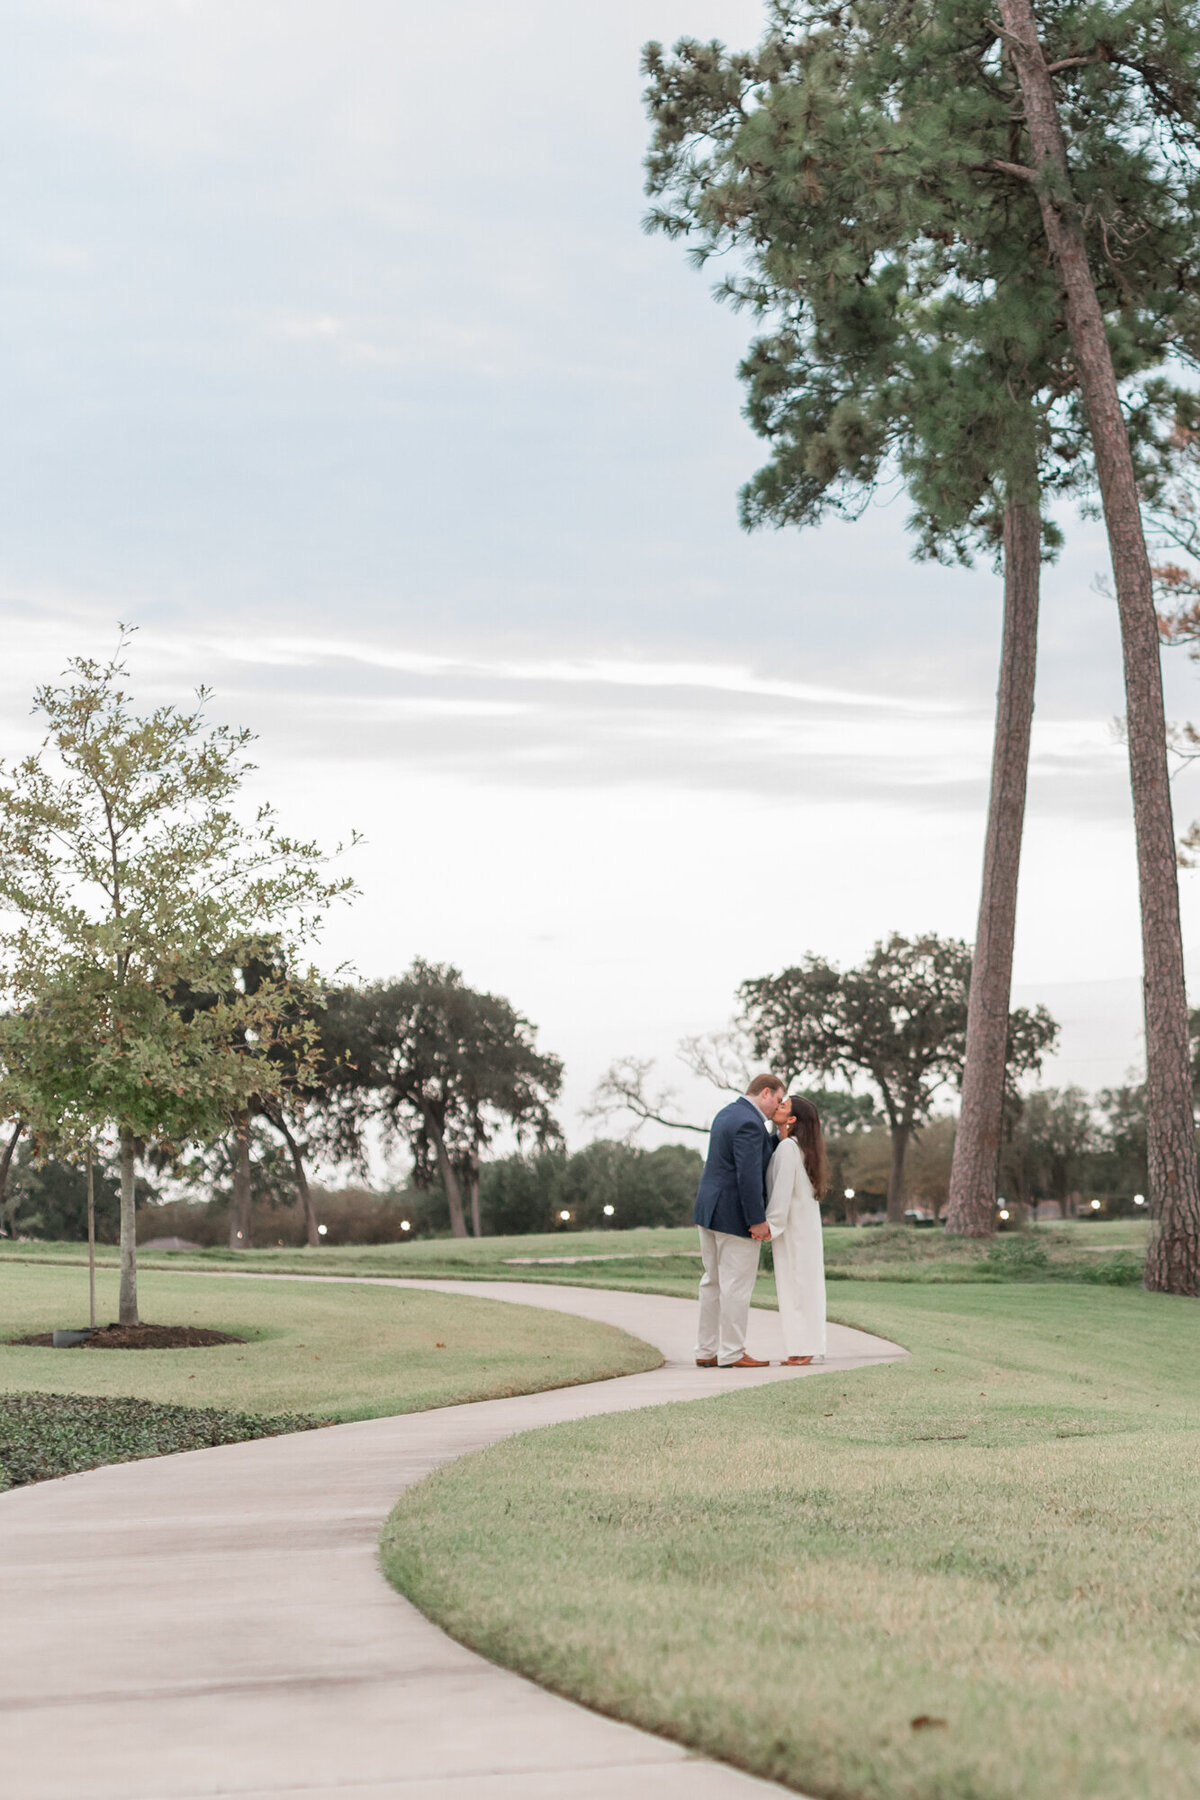 bride and groom kiss while standing alone a winding sidewalk at lakeside country club in houston,f or their rehearsal dinner